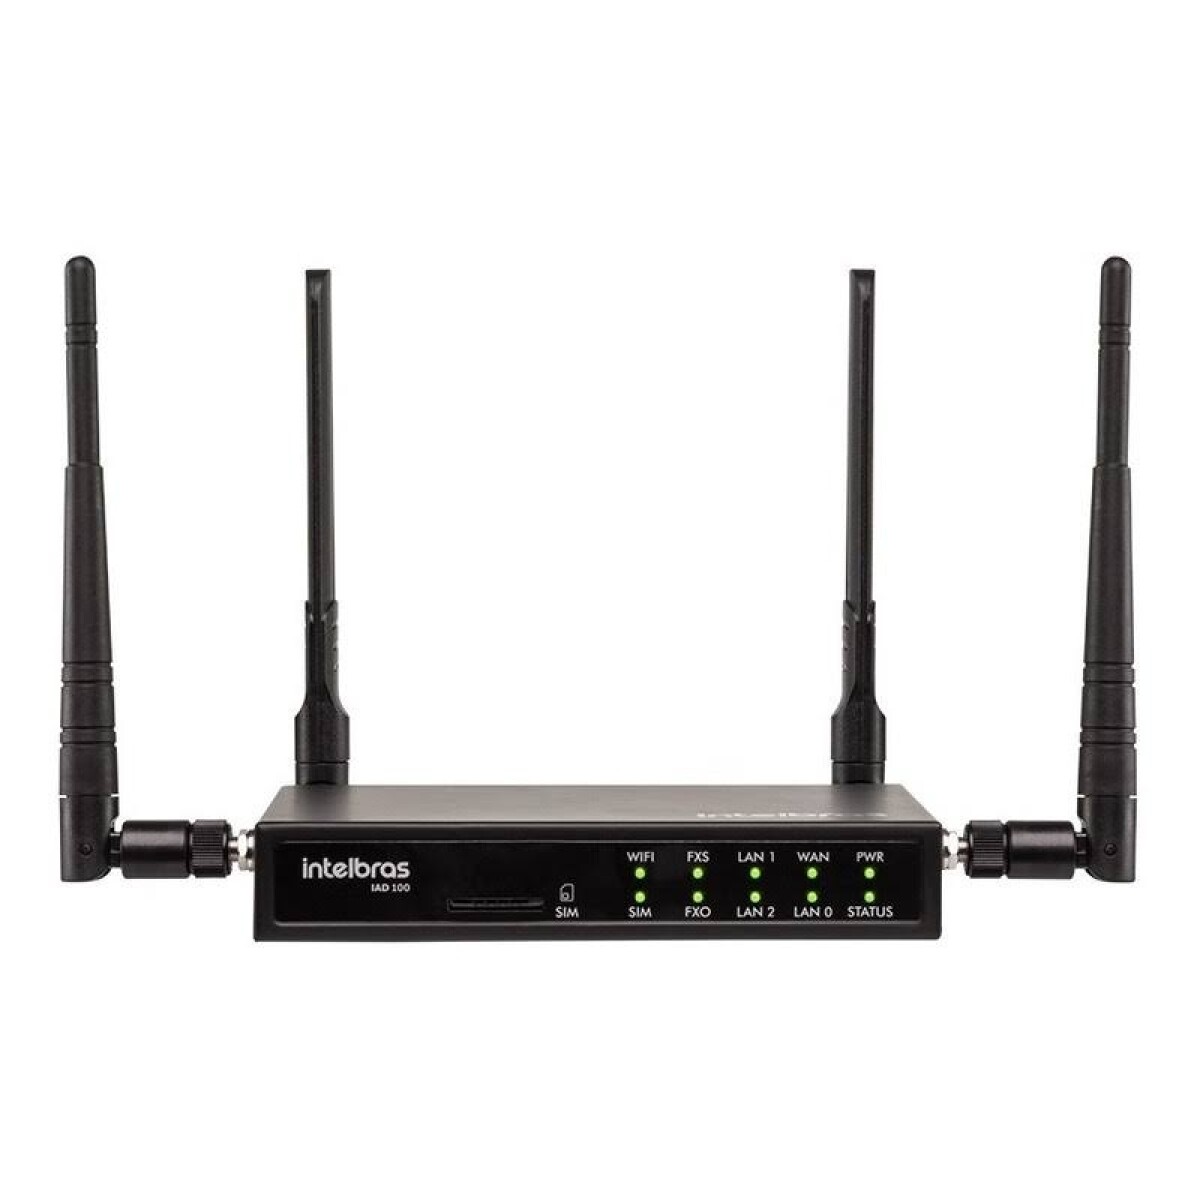 Telefonia Central IP IAD 100 Router 4G 32 Int SIP INTELBRAS - Telefonia Central Ip Iad 100 Router 4g 32 Int Sip Intelbras 